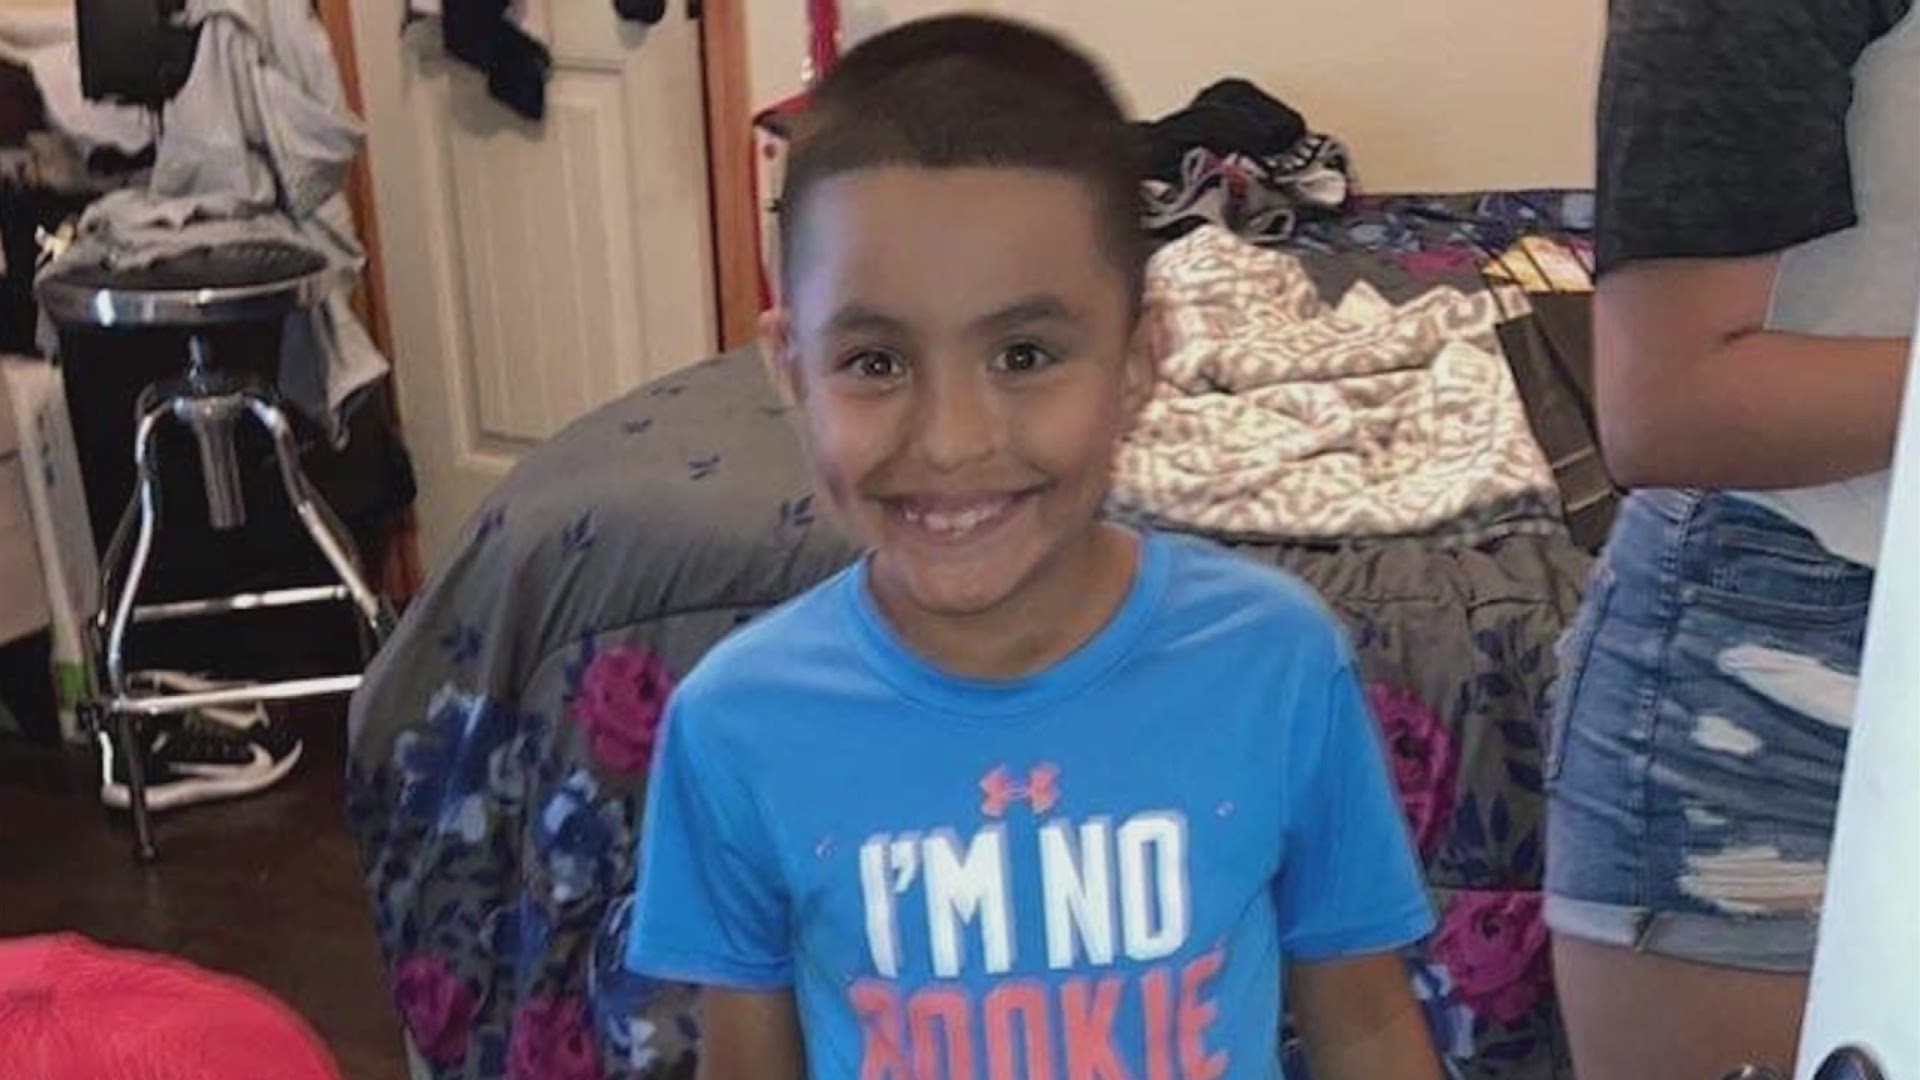 Jacob Brito was allegedly stabbed to death by his older brother